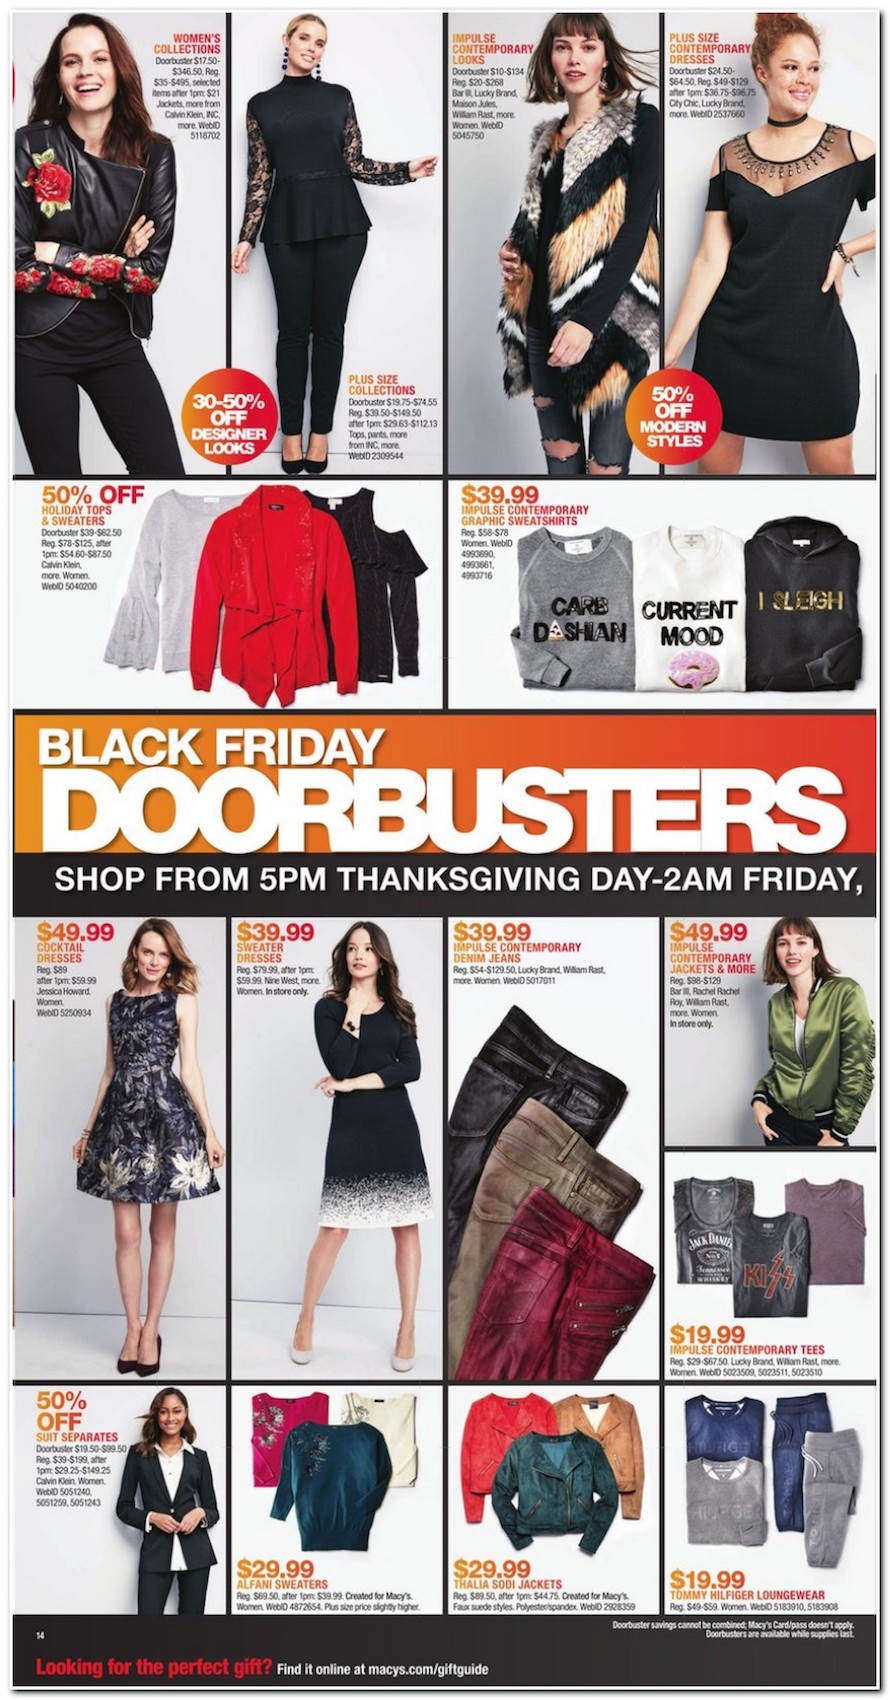 Macy’s Black Friday 2018 Ad, Deals and Store Hours - NerdWallet